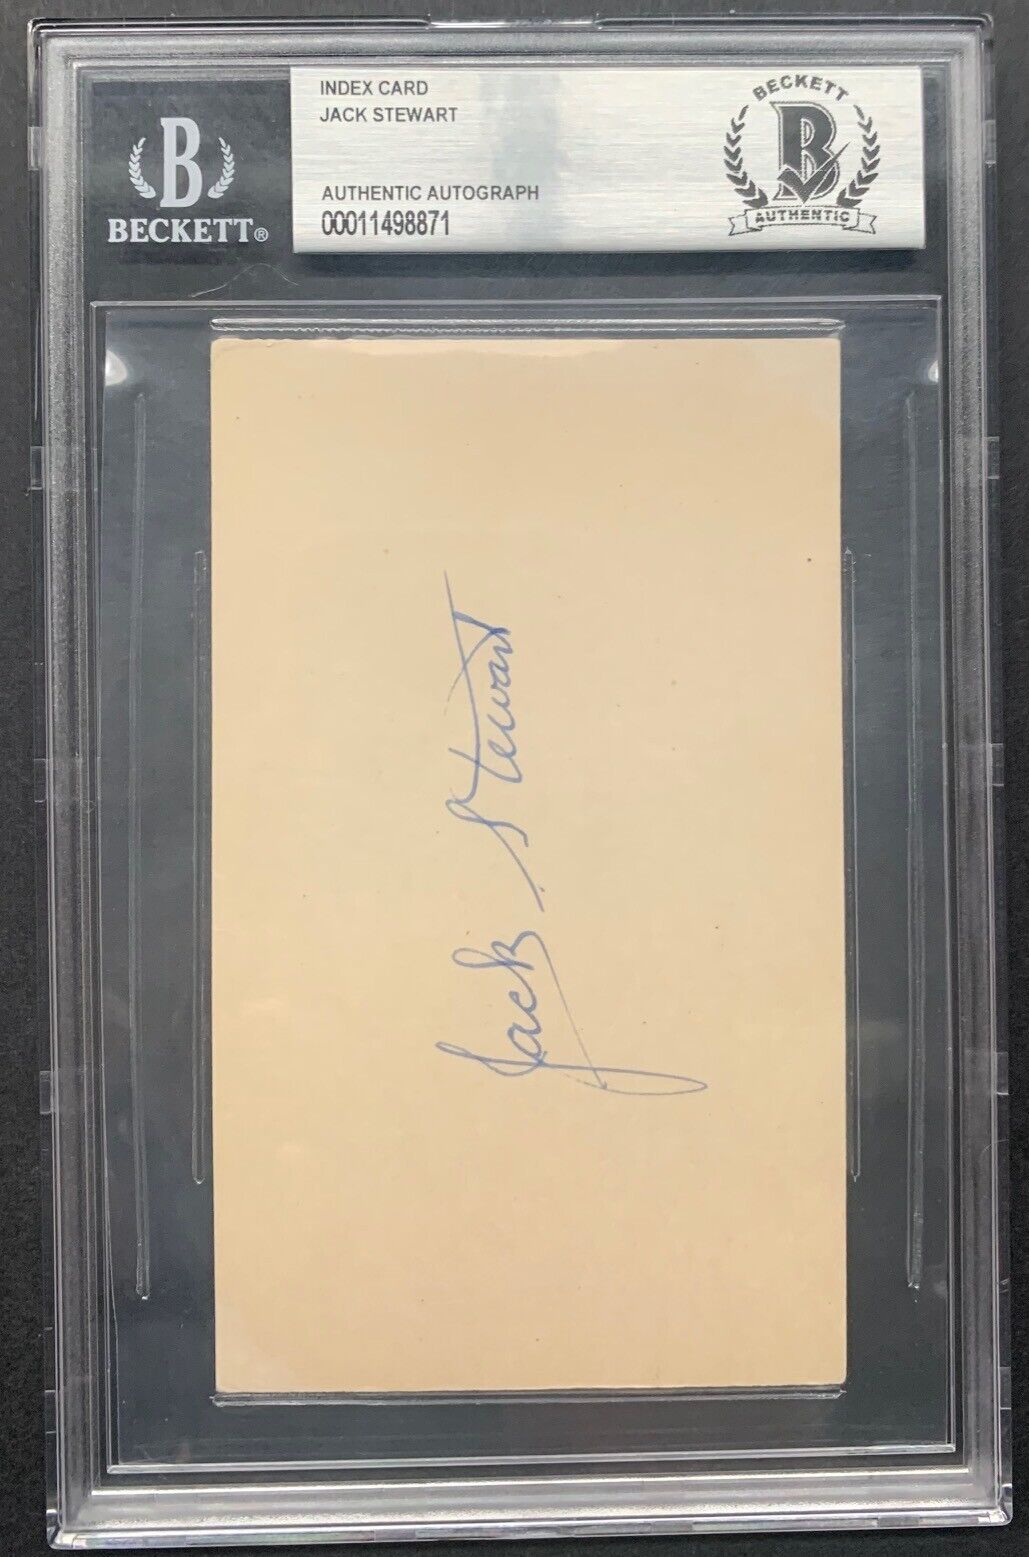 Early Wynn Autographed Signed Index Card Beckett Slabbed Authenticated MLB HOF